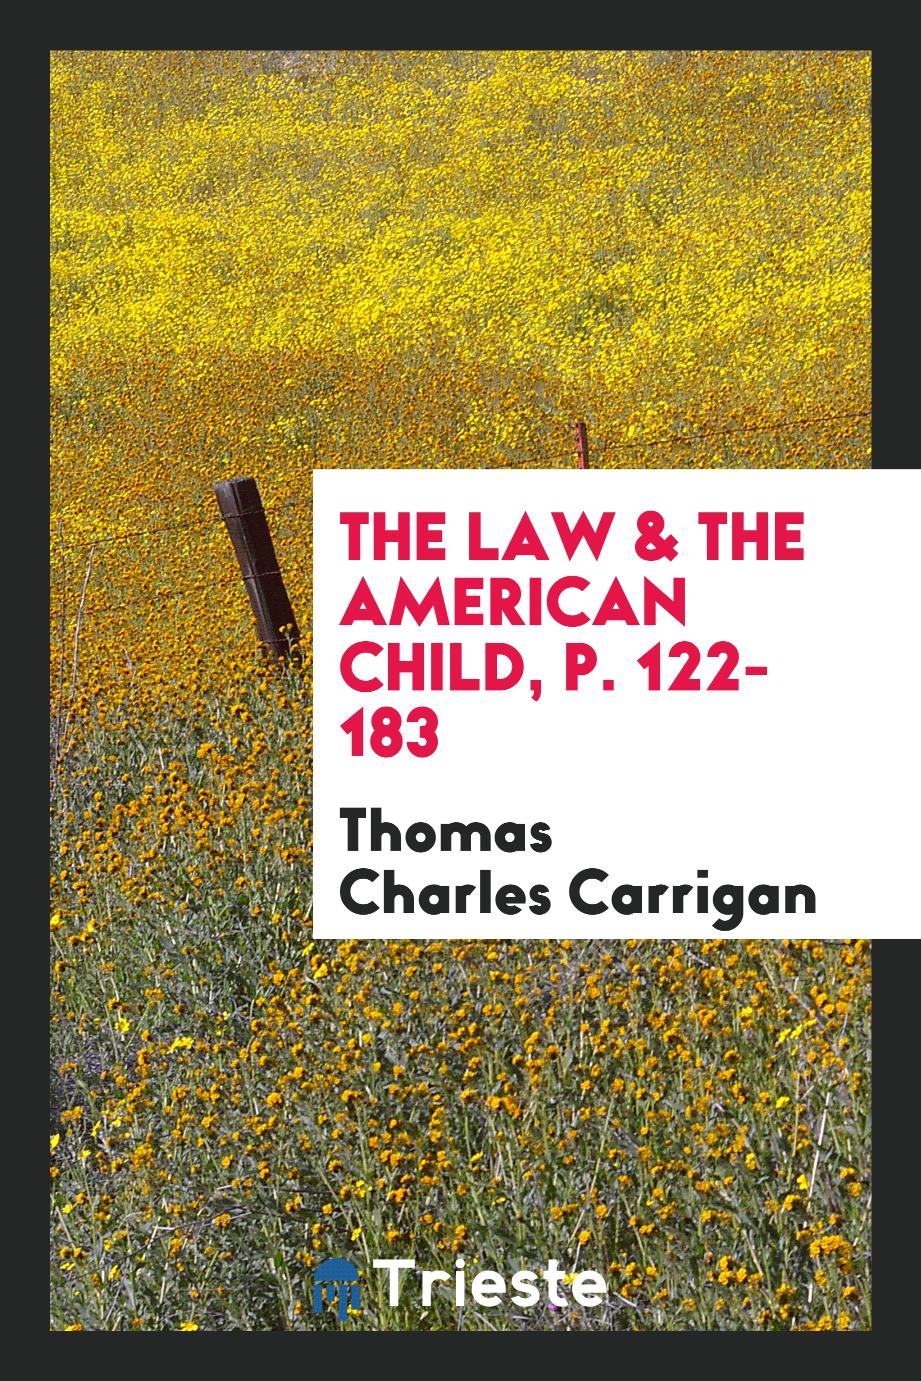 The Law & the American Child, p. 122-183